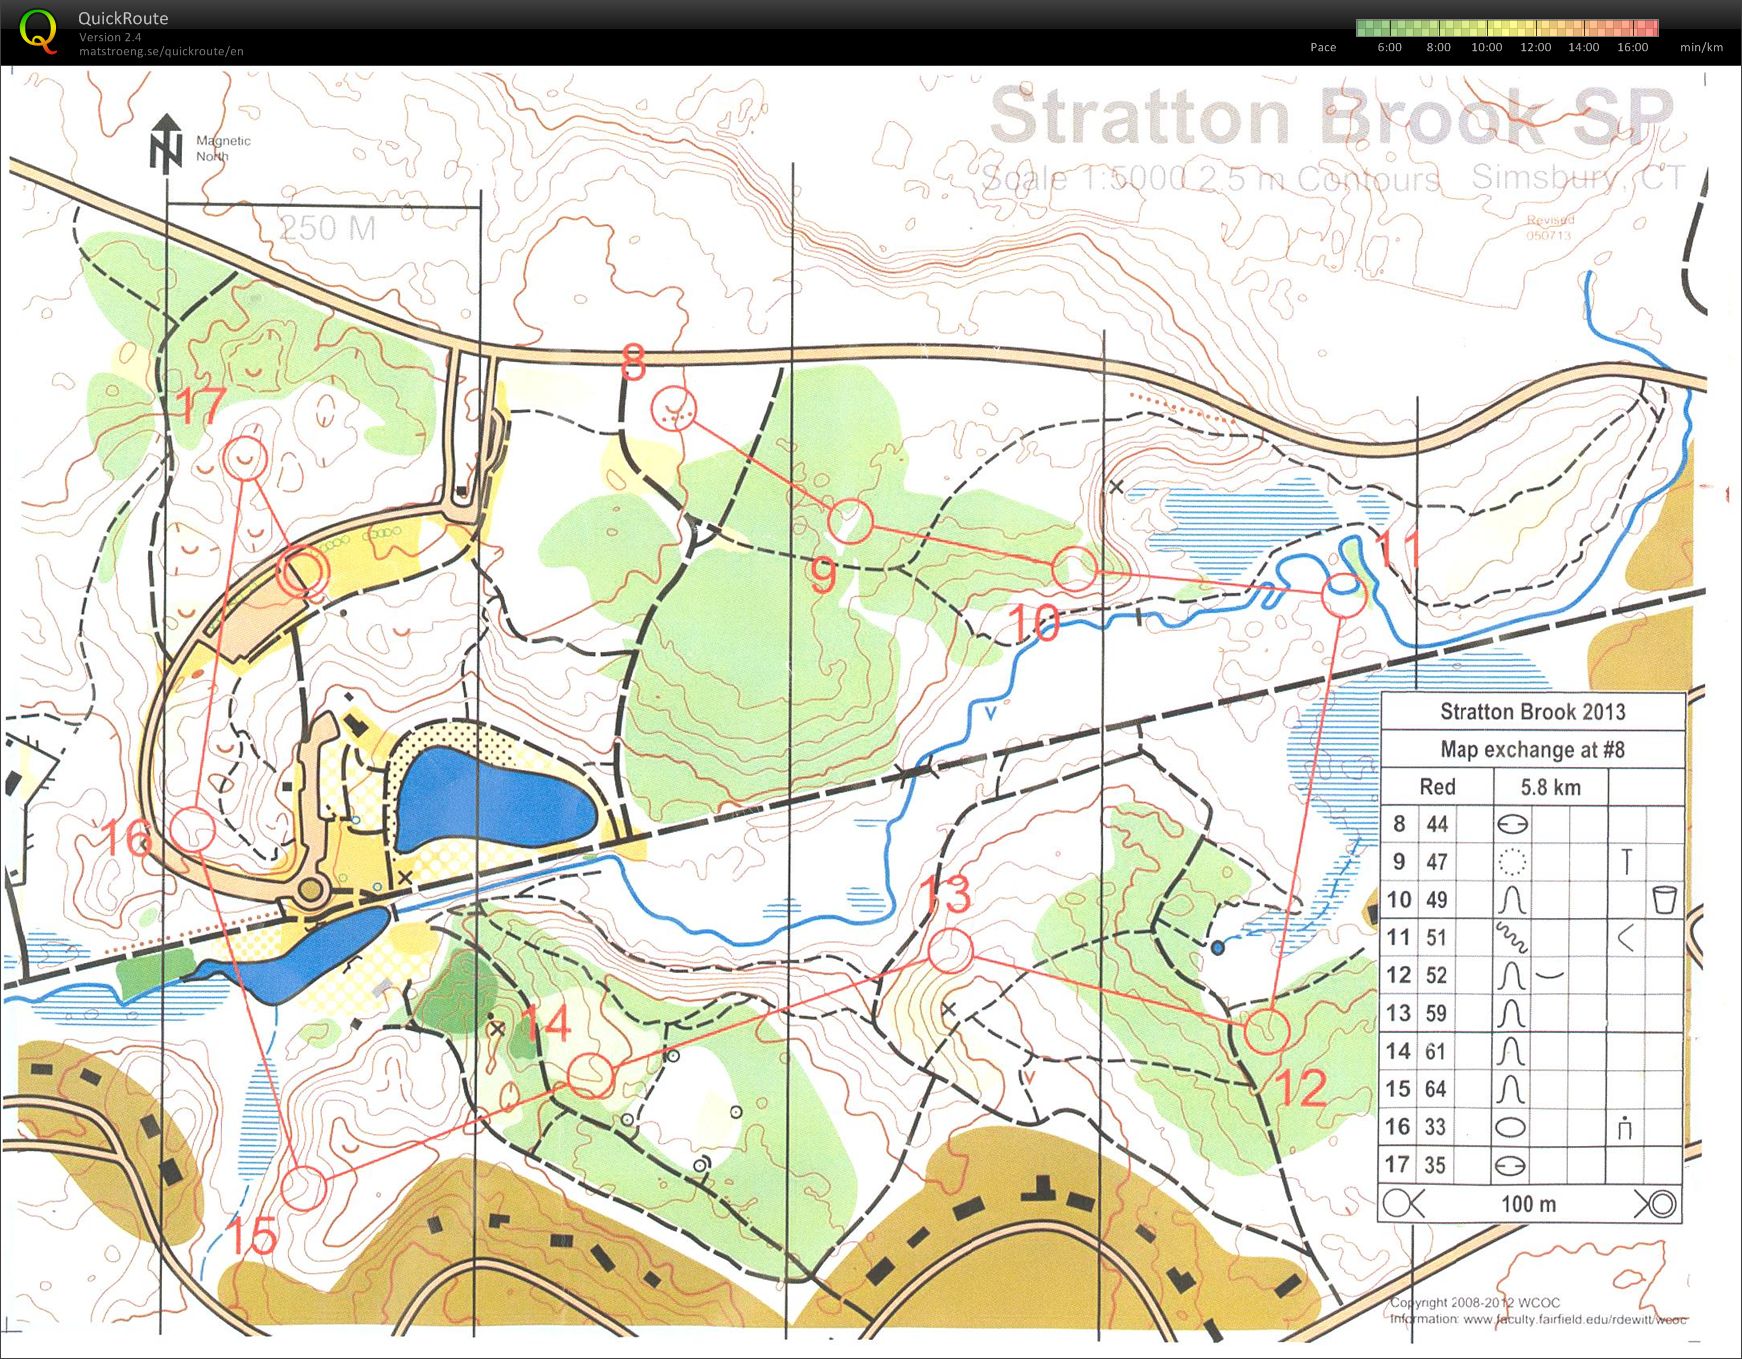 Stratton Brook Red Course, Part 2 (19/05/2013)